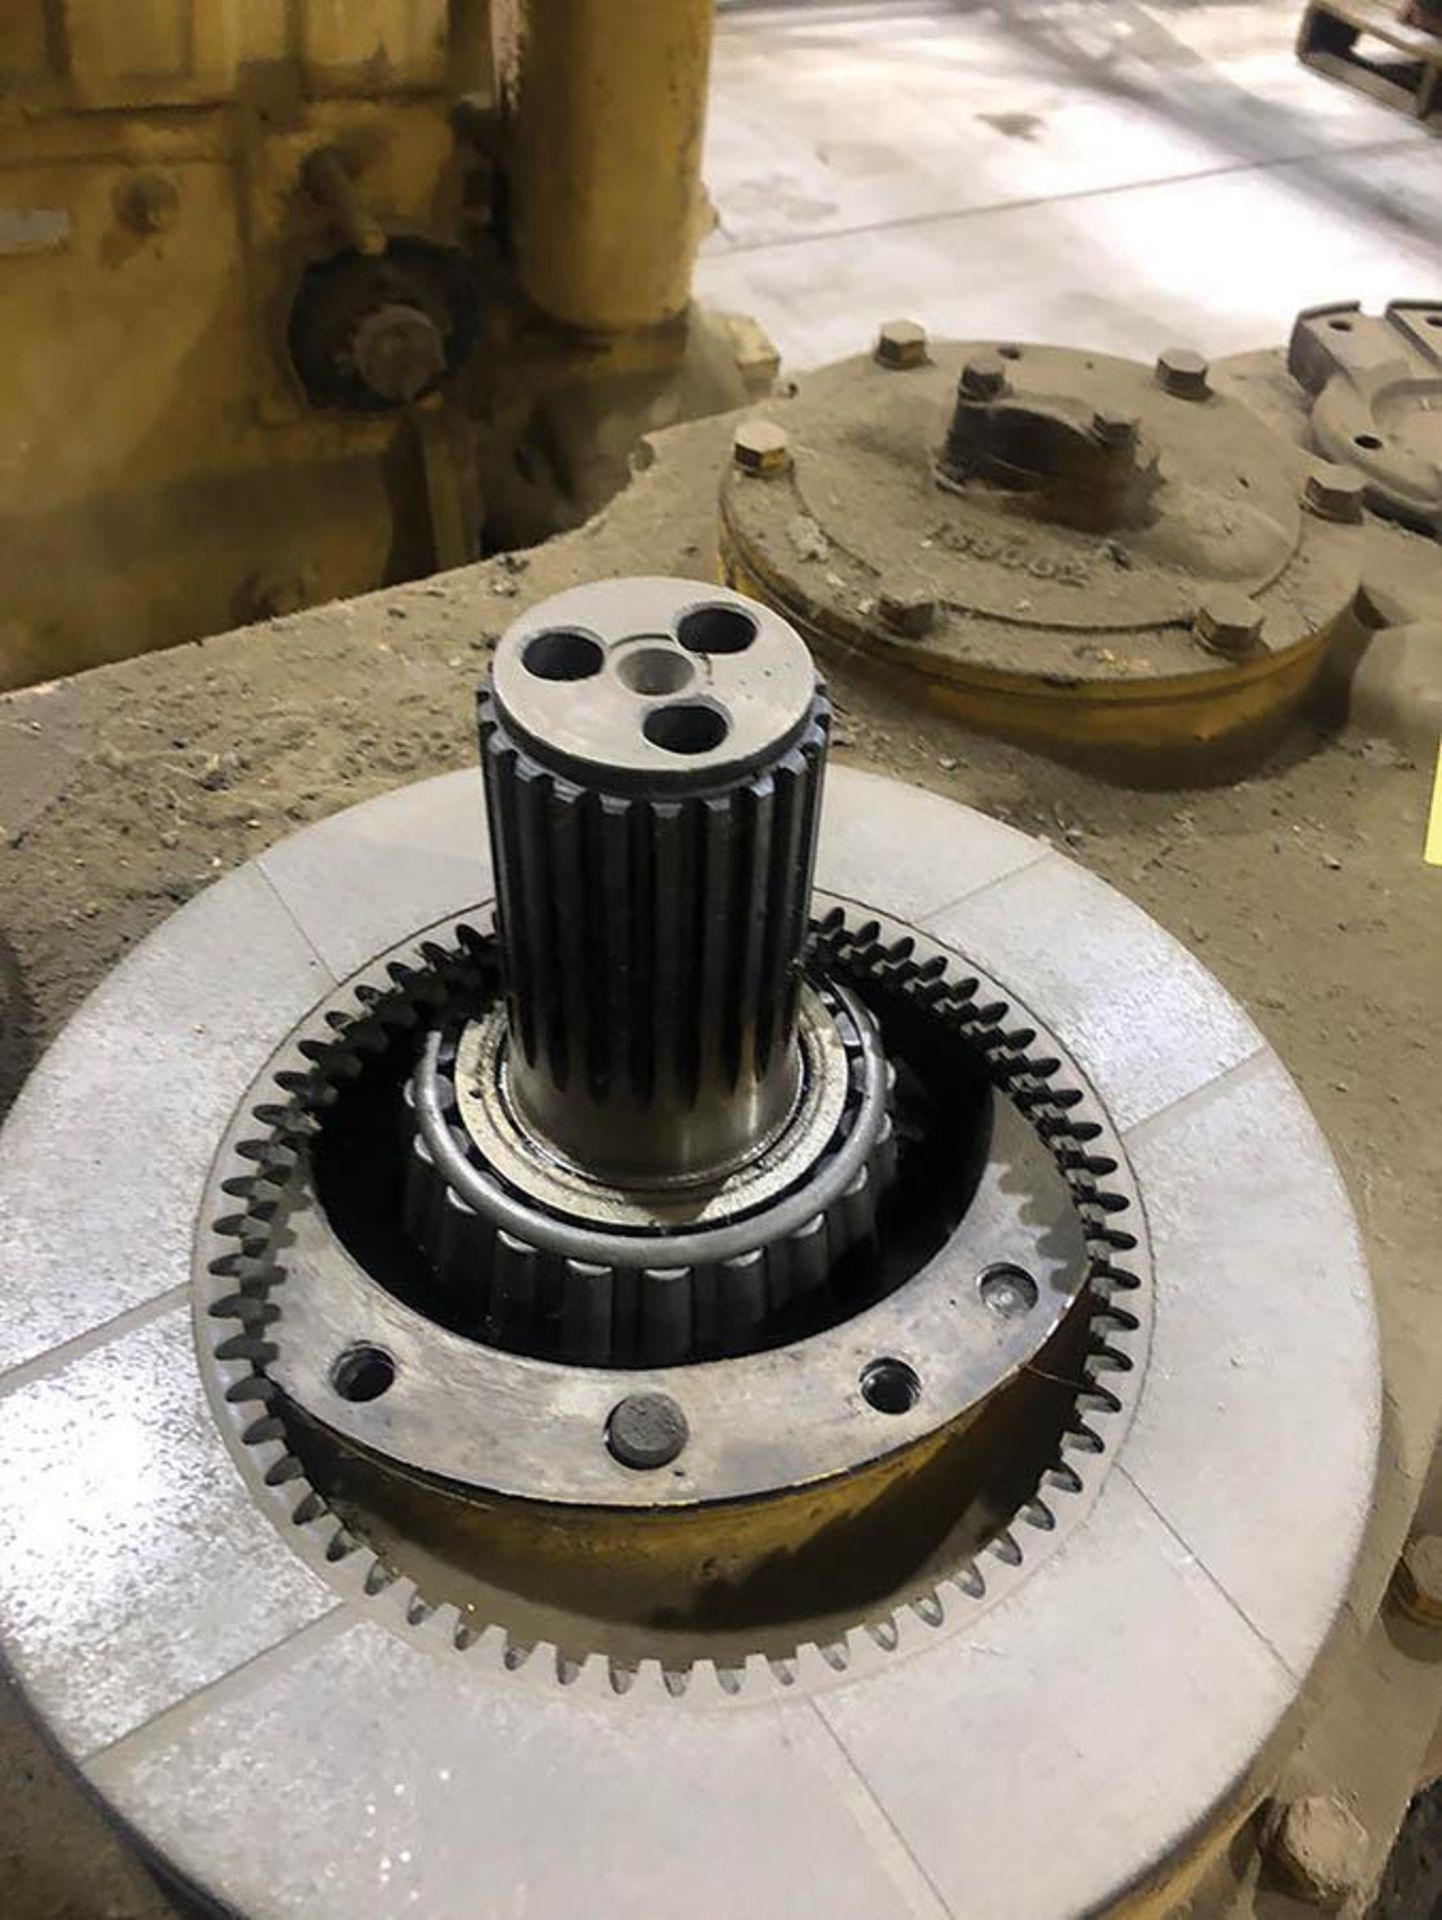 CATERPILLAR 825 TRANSFER GEAR CASE AND GEARS - Image 3 of 4